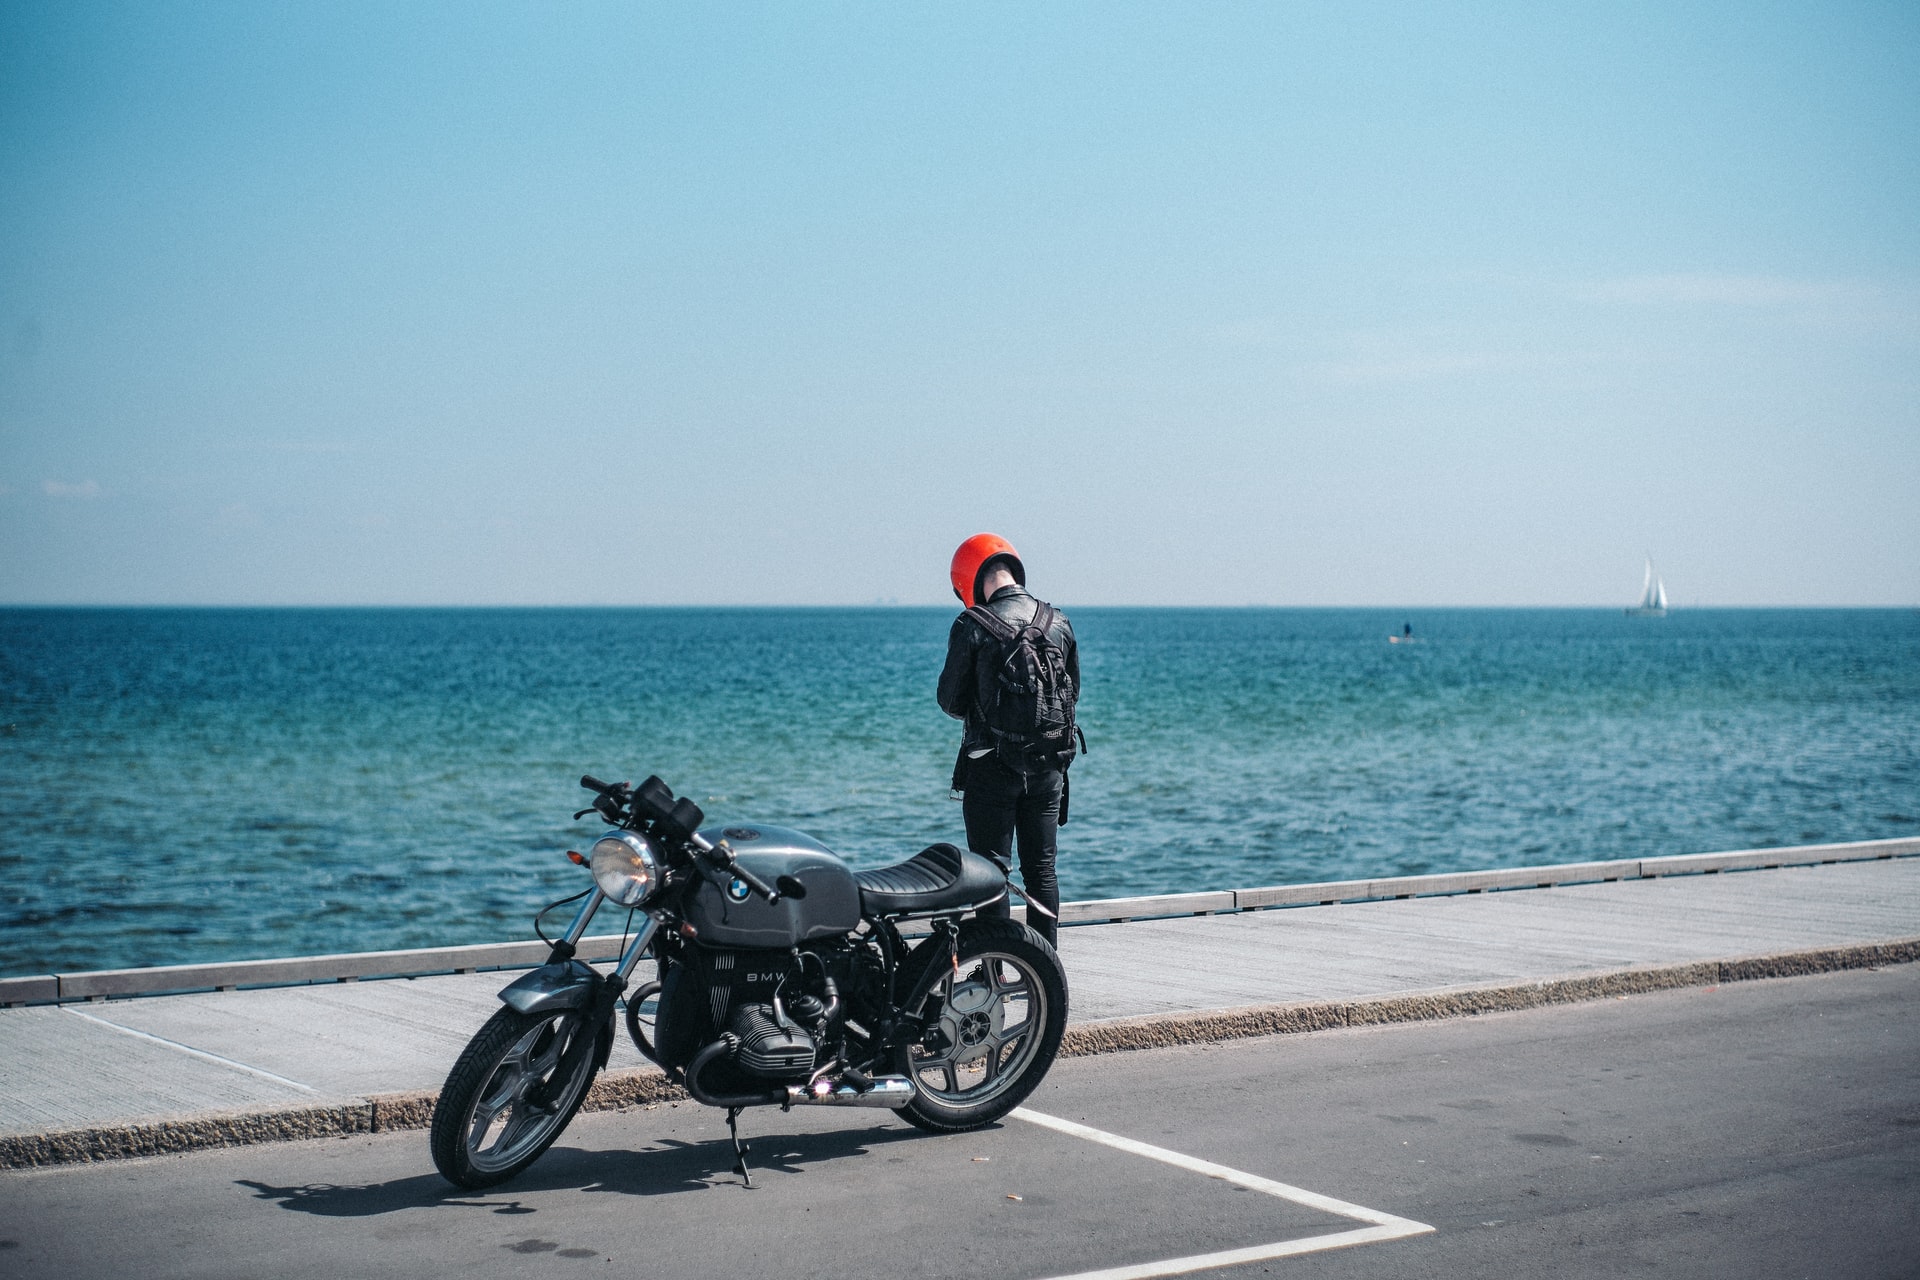 Riding Check What to Wear on a Motorcycle